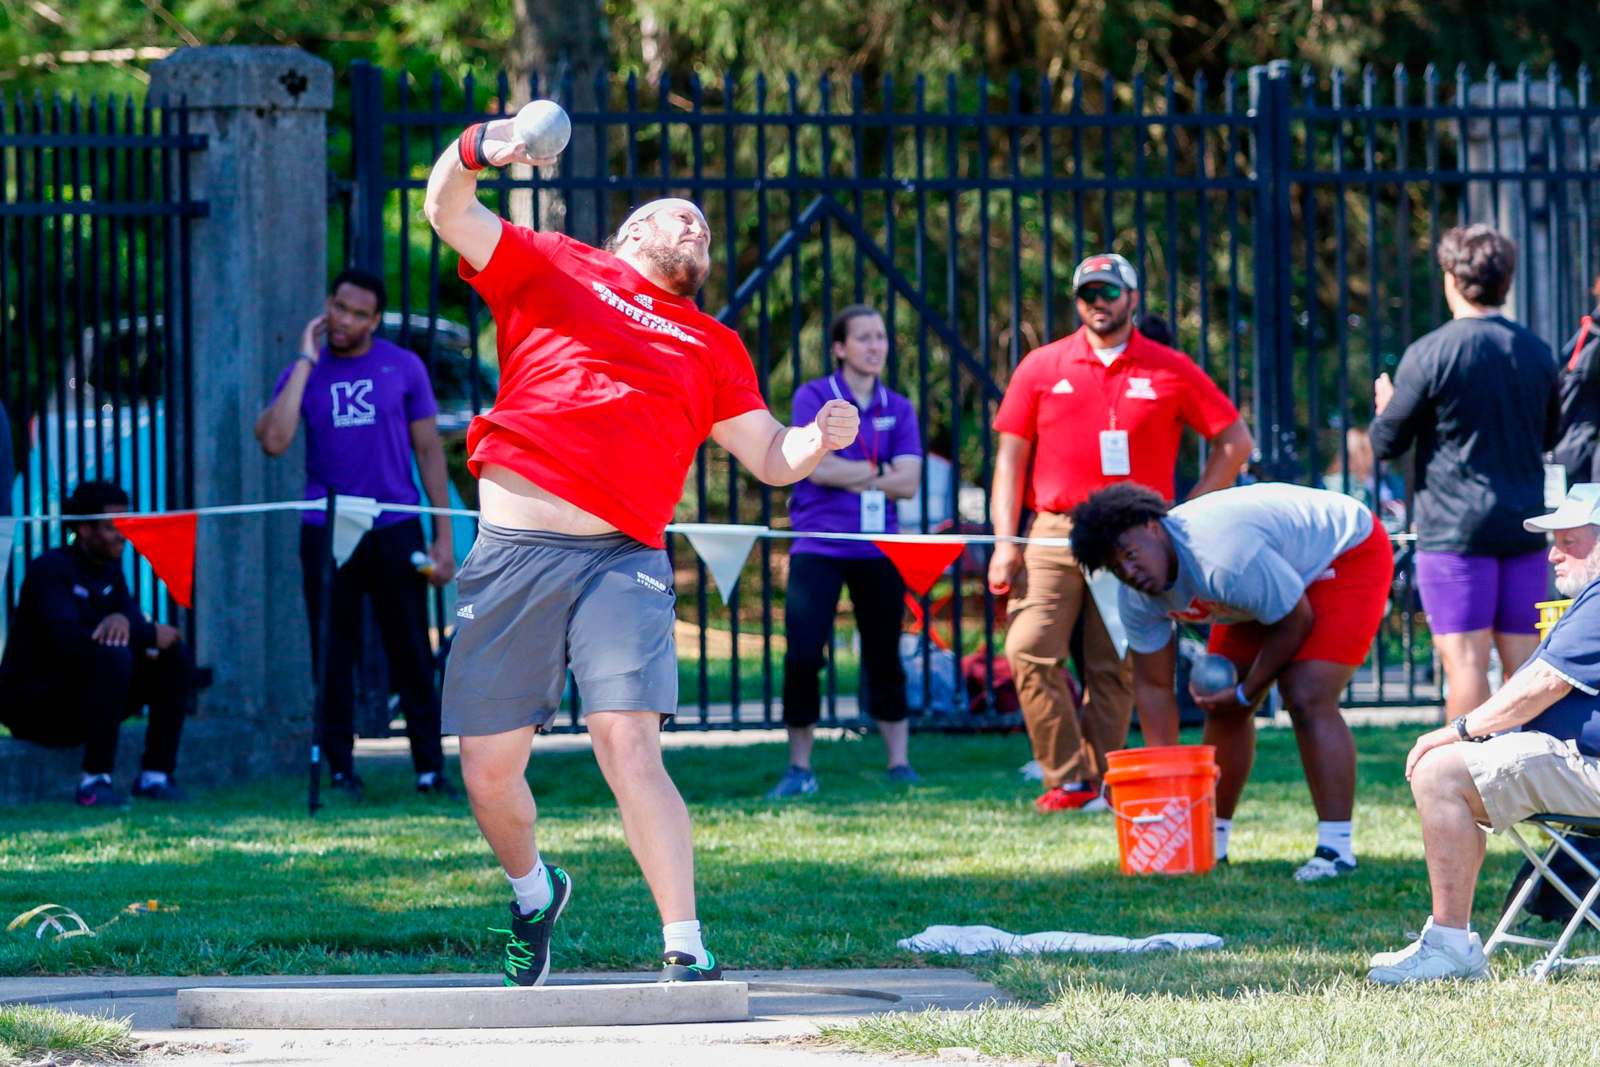 a man in red shirt throwing a ball